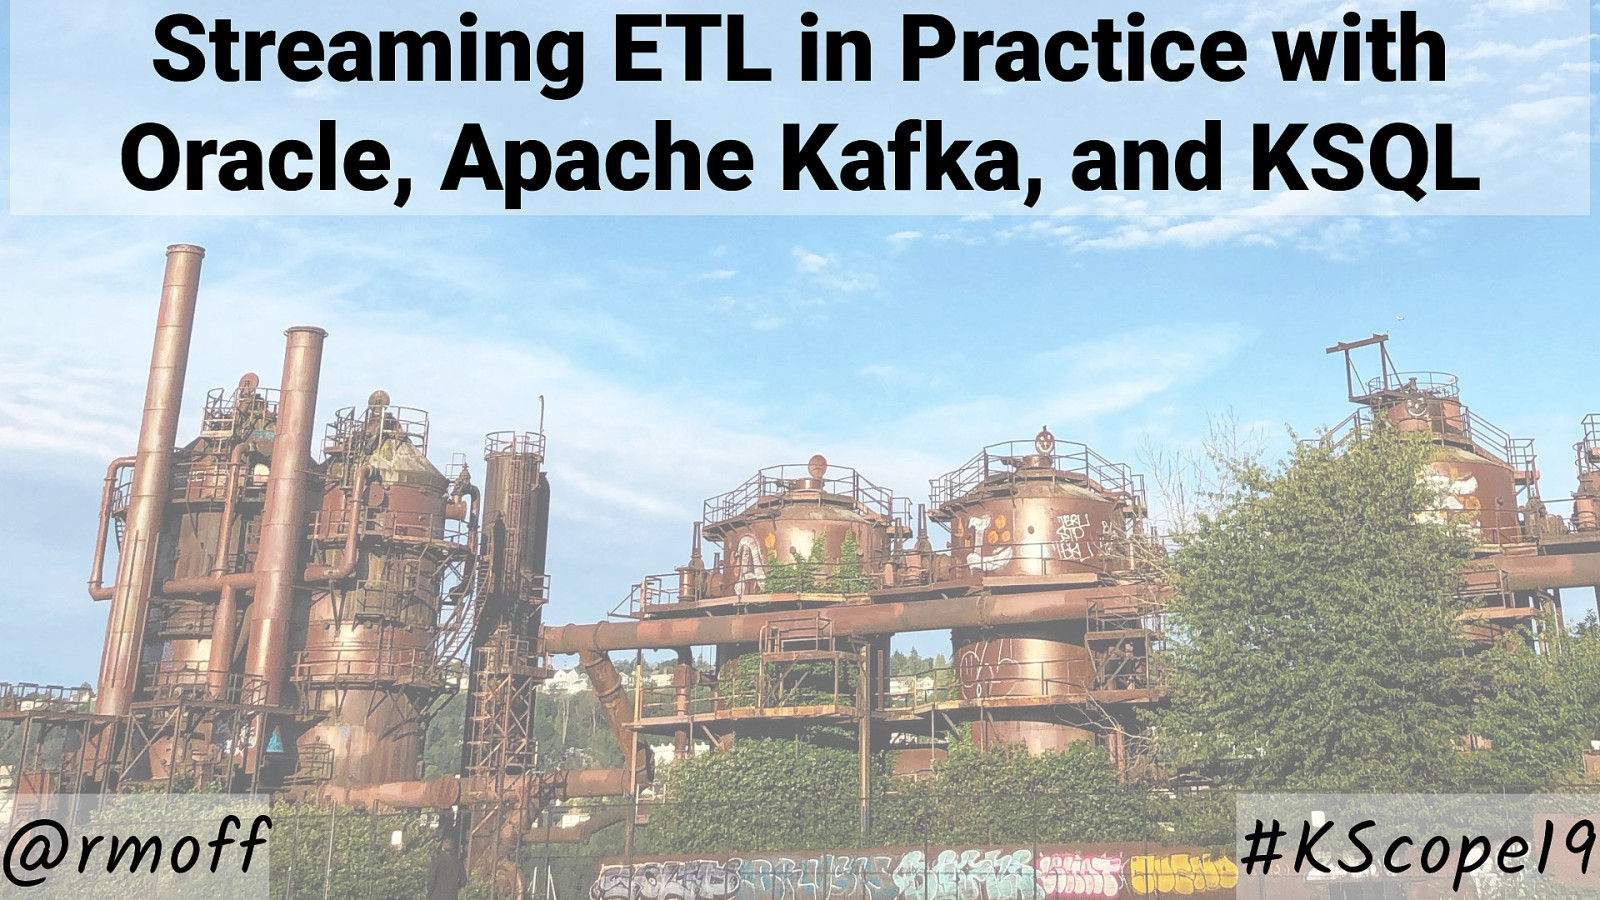 Streaming ETL in Practice with Oracle, Apache Kafka, and KSQL